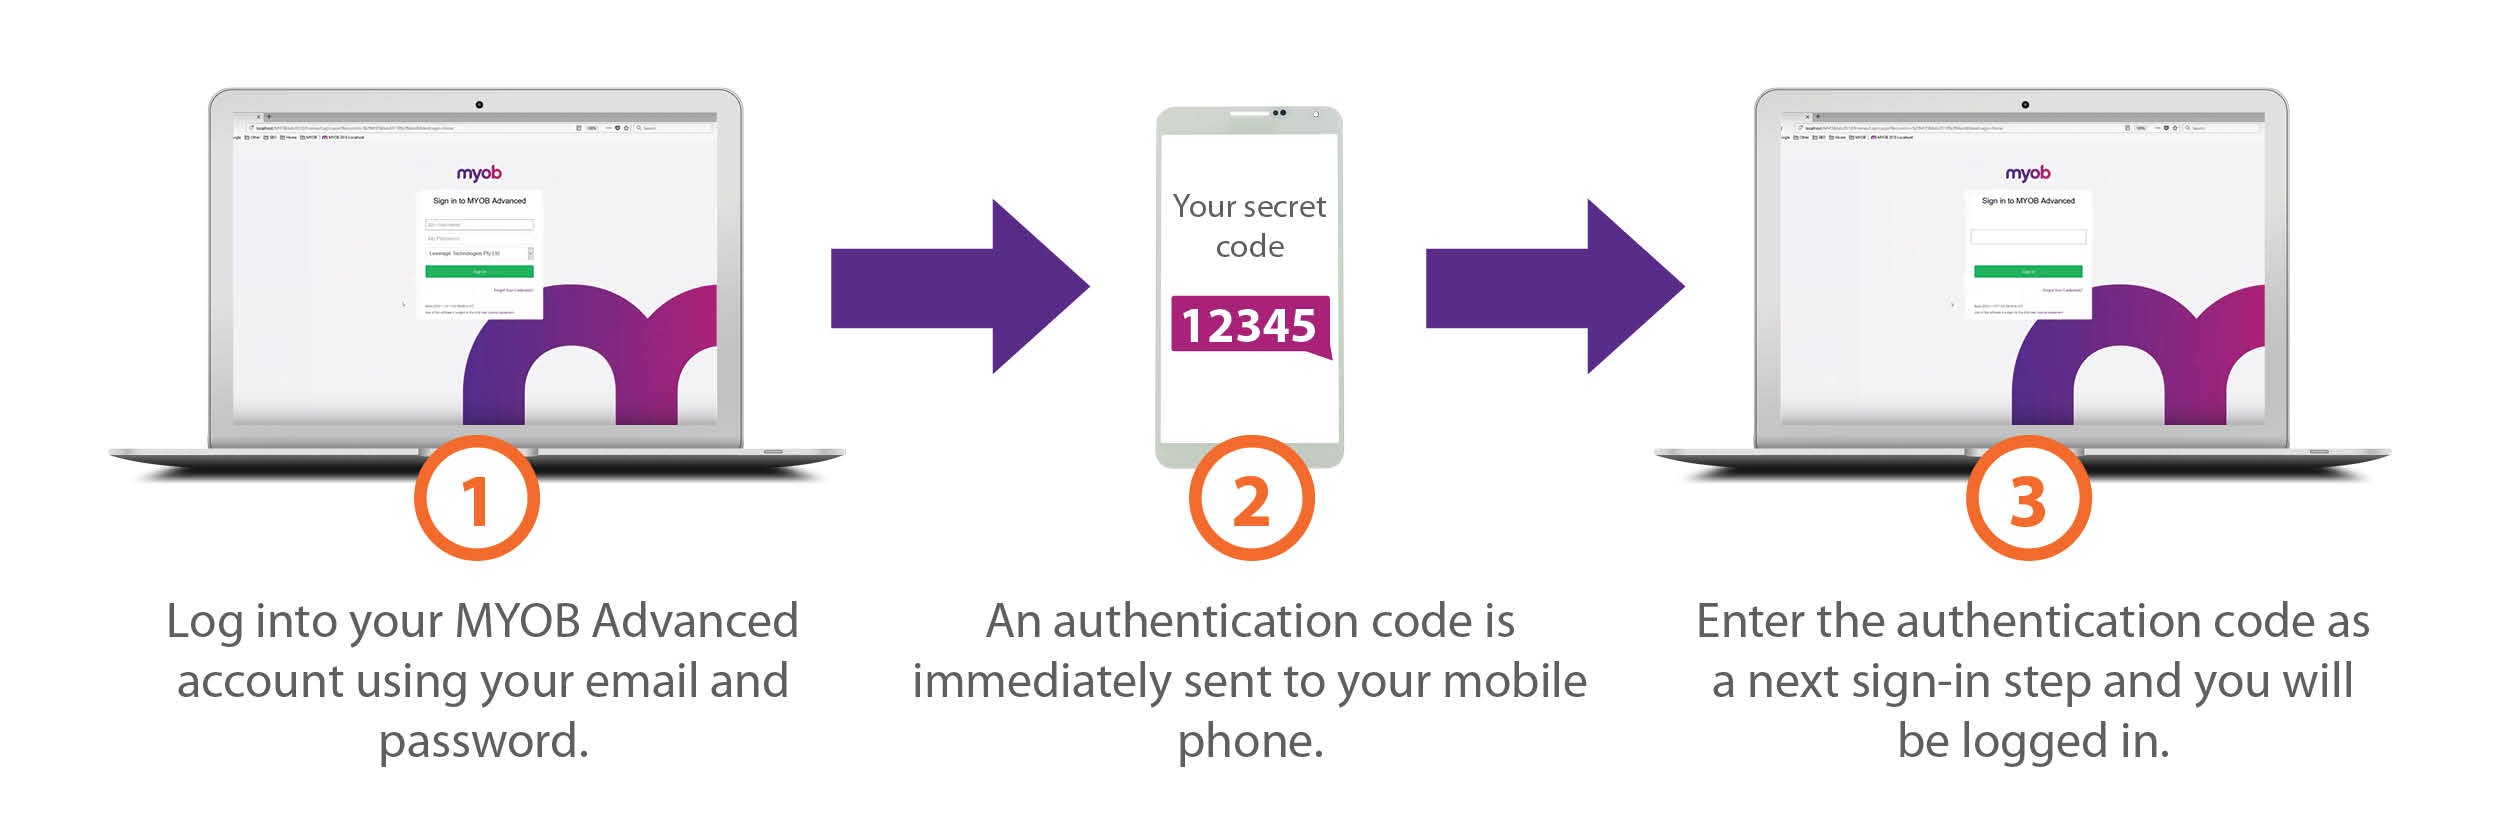 MYOB Advanced two-factor authentication process